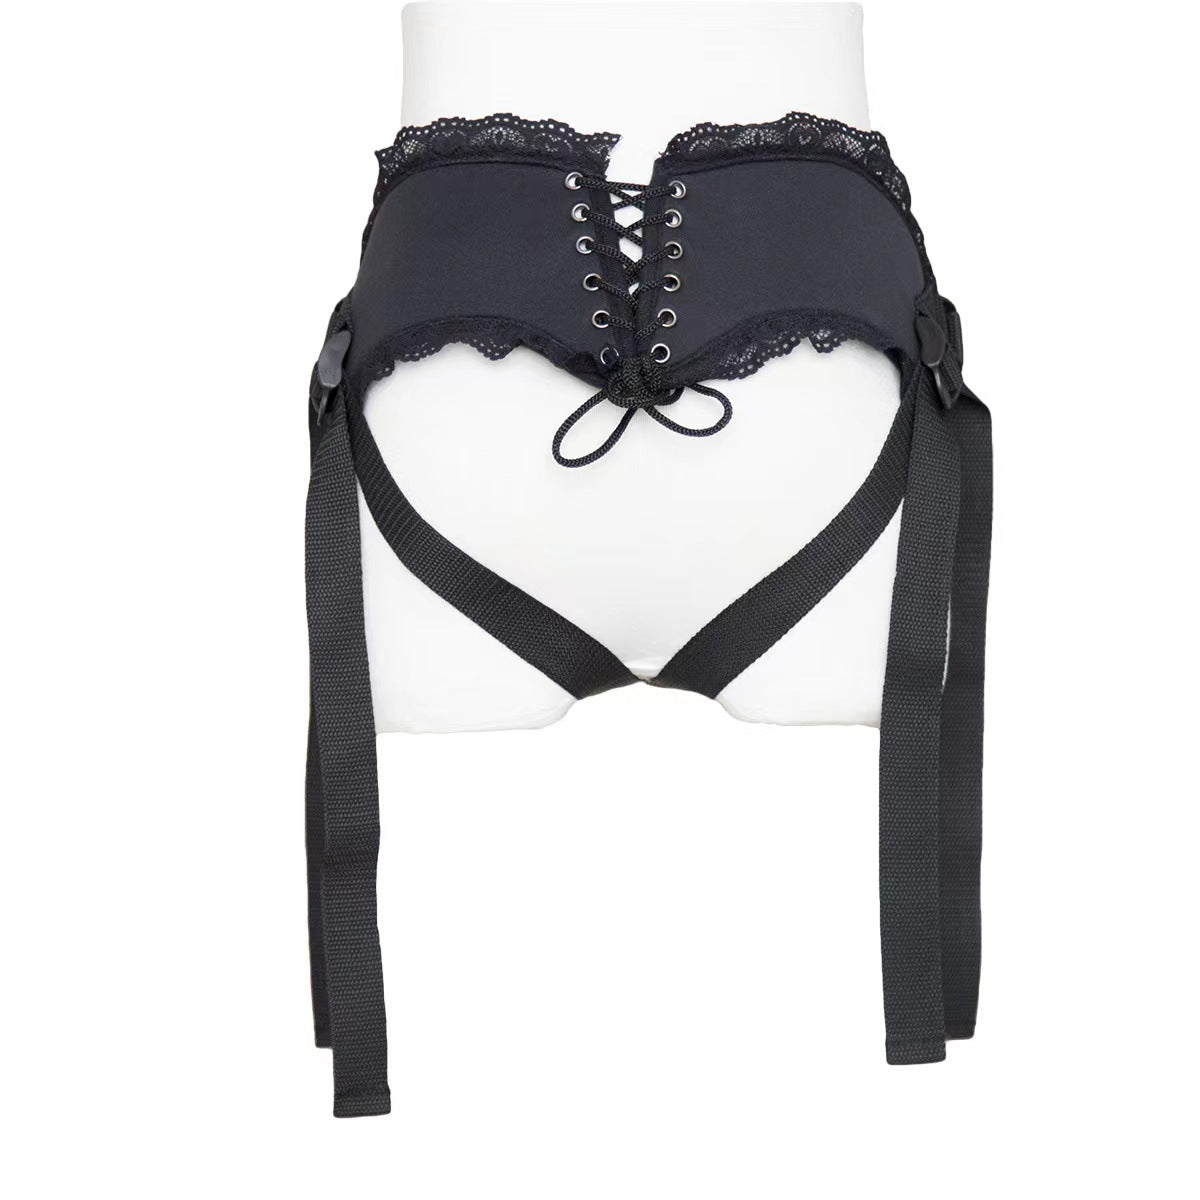 The Horny Company - Black Dragon Strap-on Harness with Lace Details